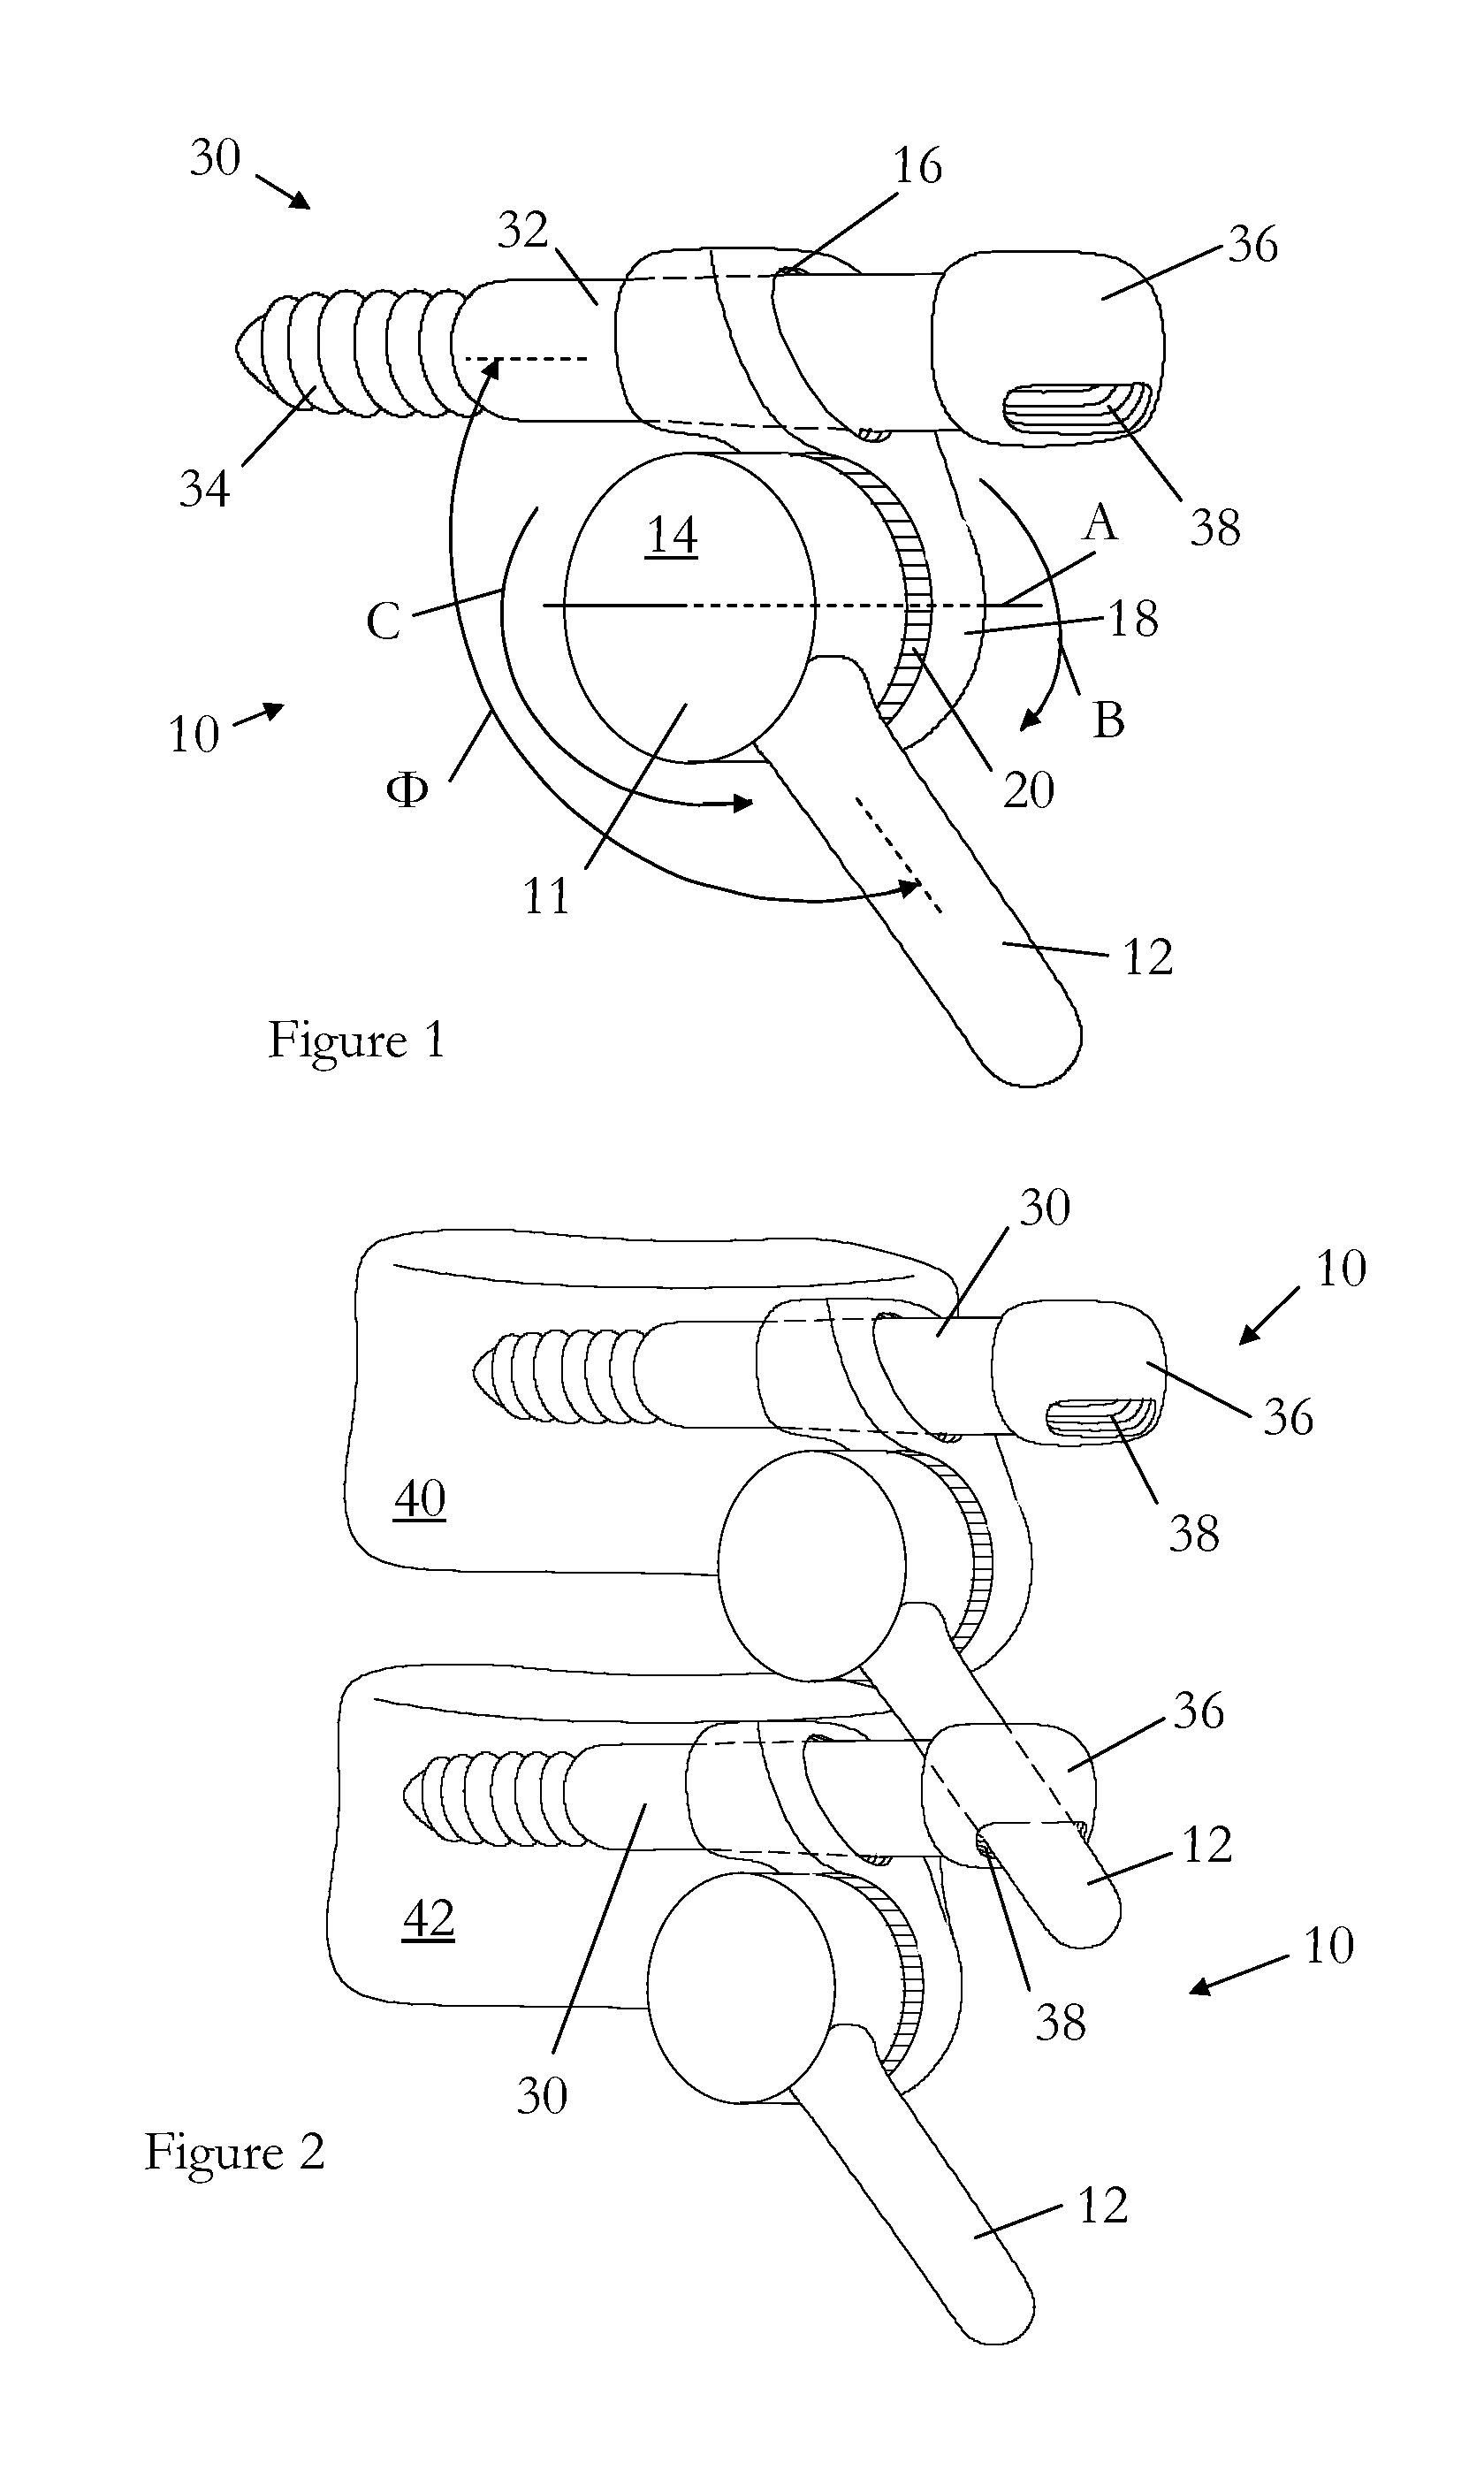 Surgical device for correction of spinal deformities